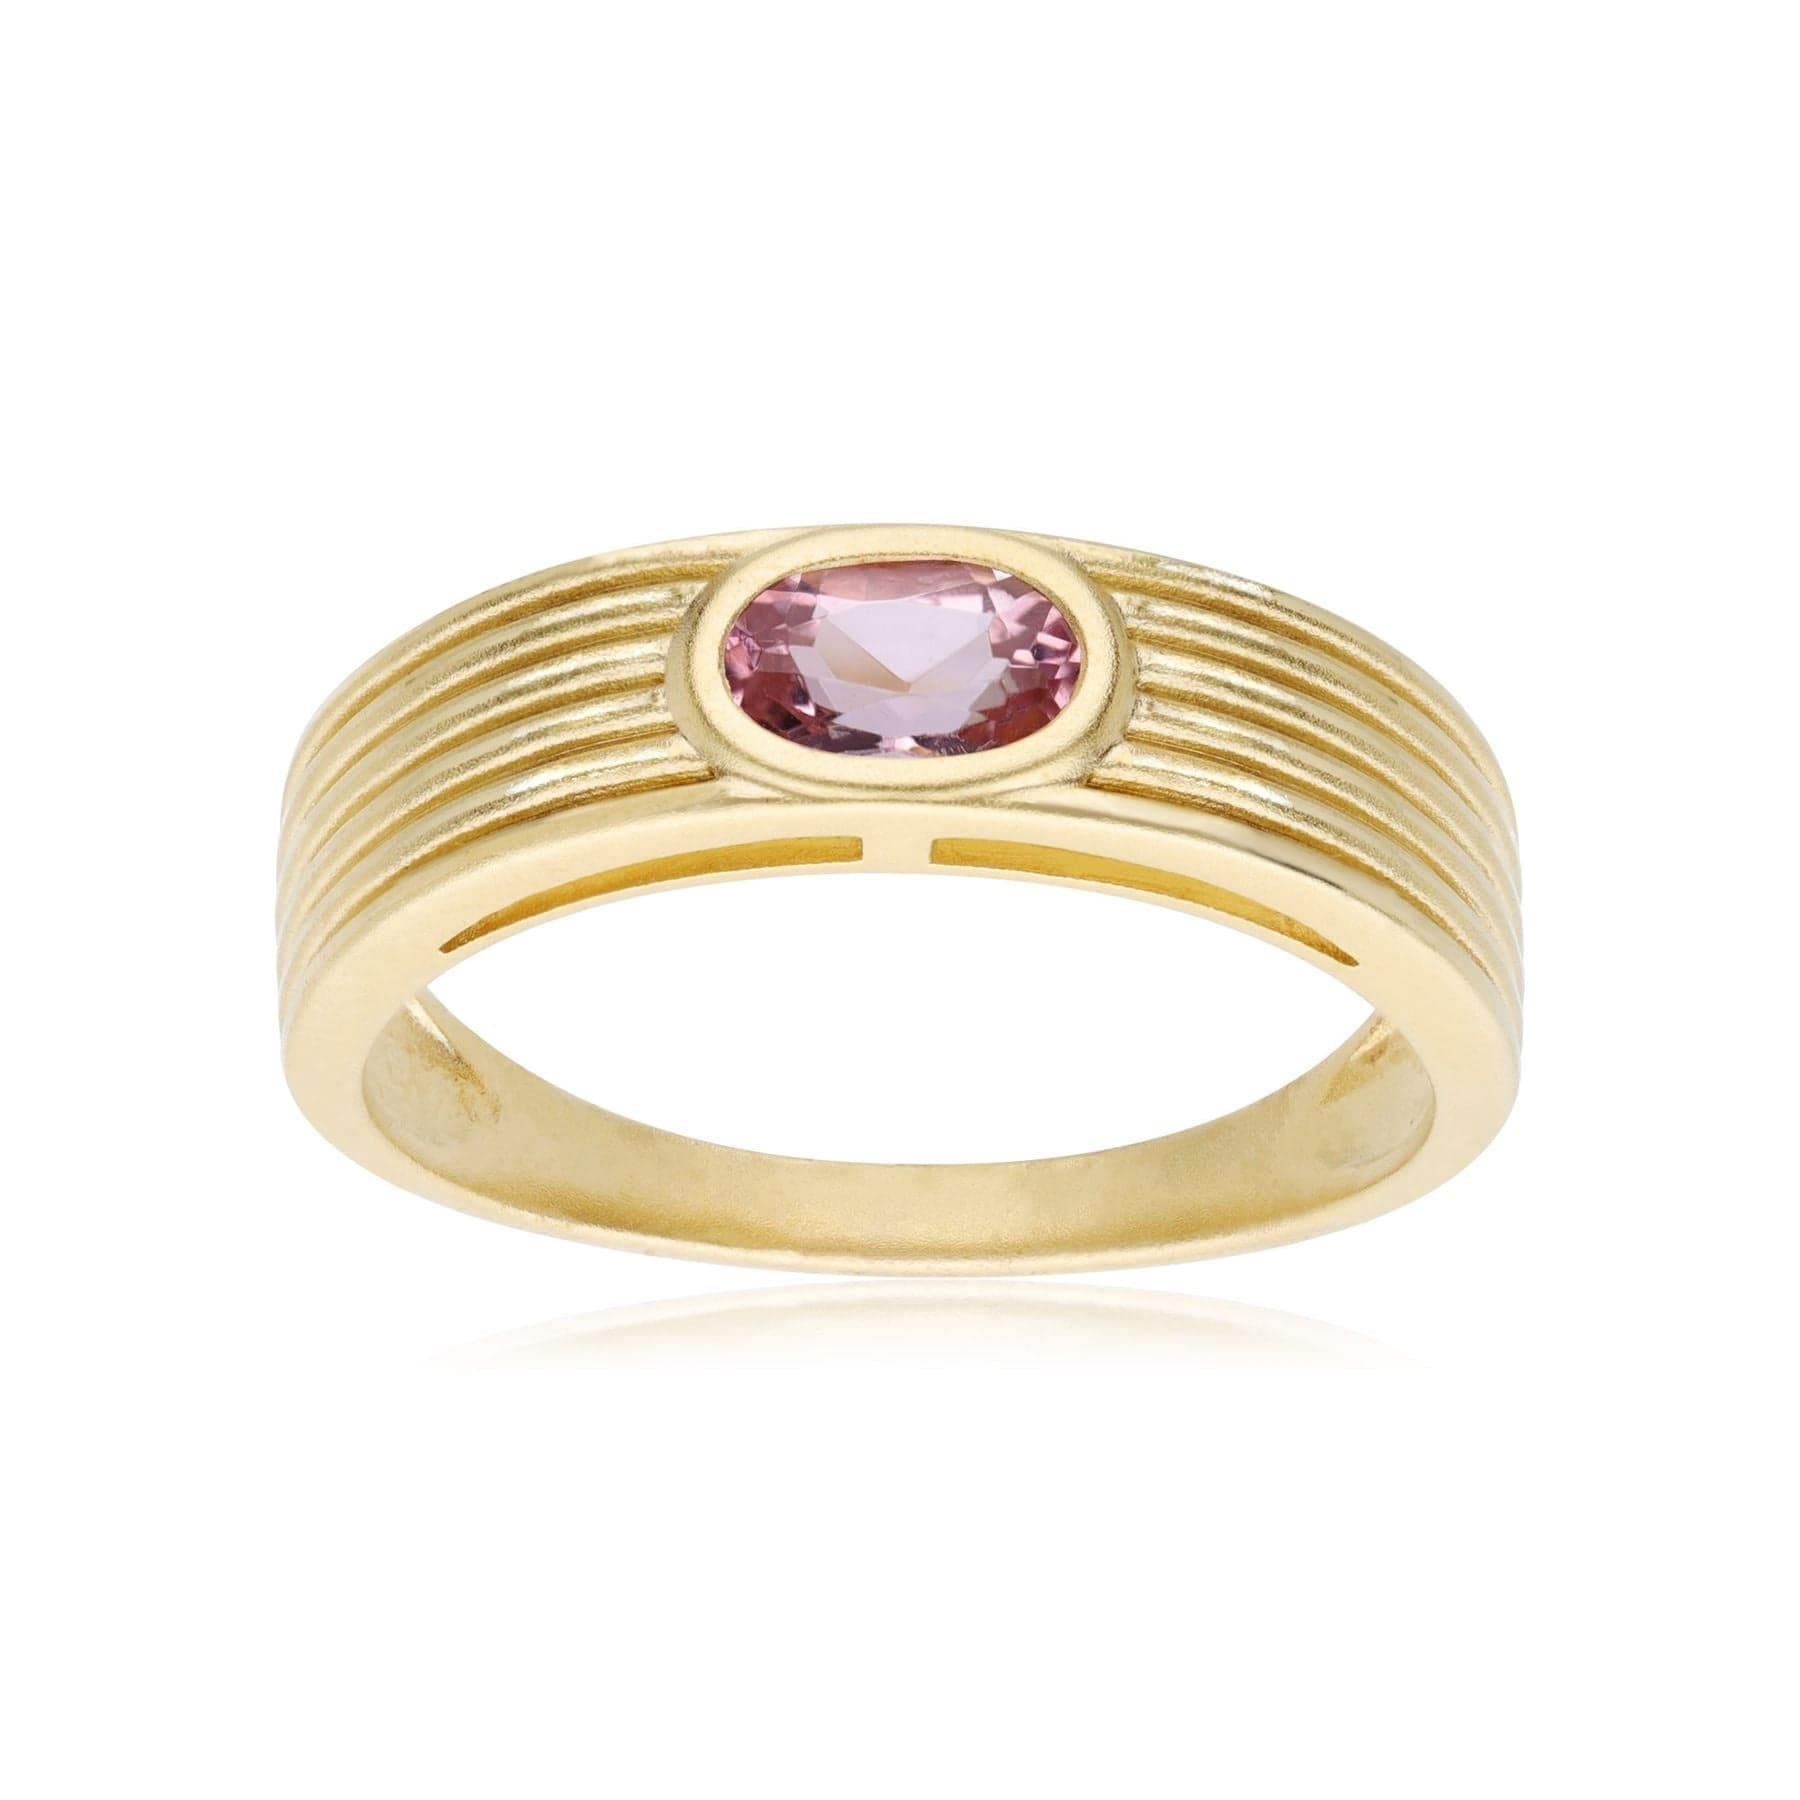 135R2000019 Caruso Pink Tourmaline Ring In 9ct Yellow Gold 4